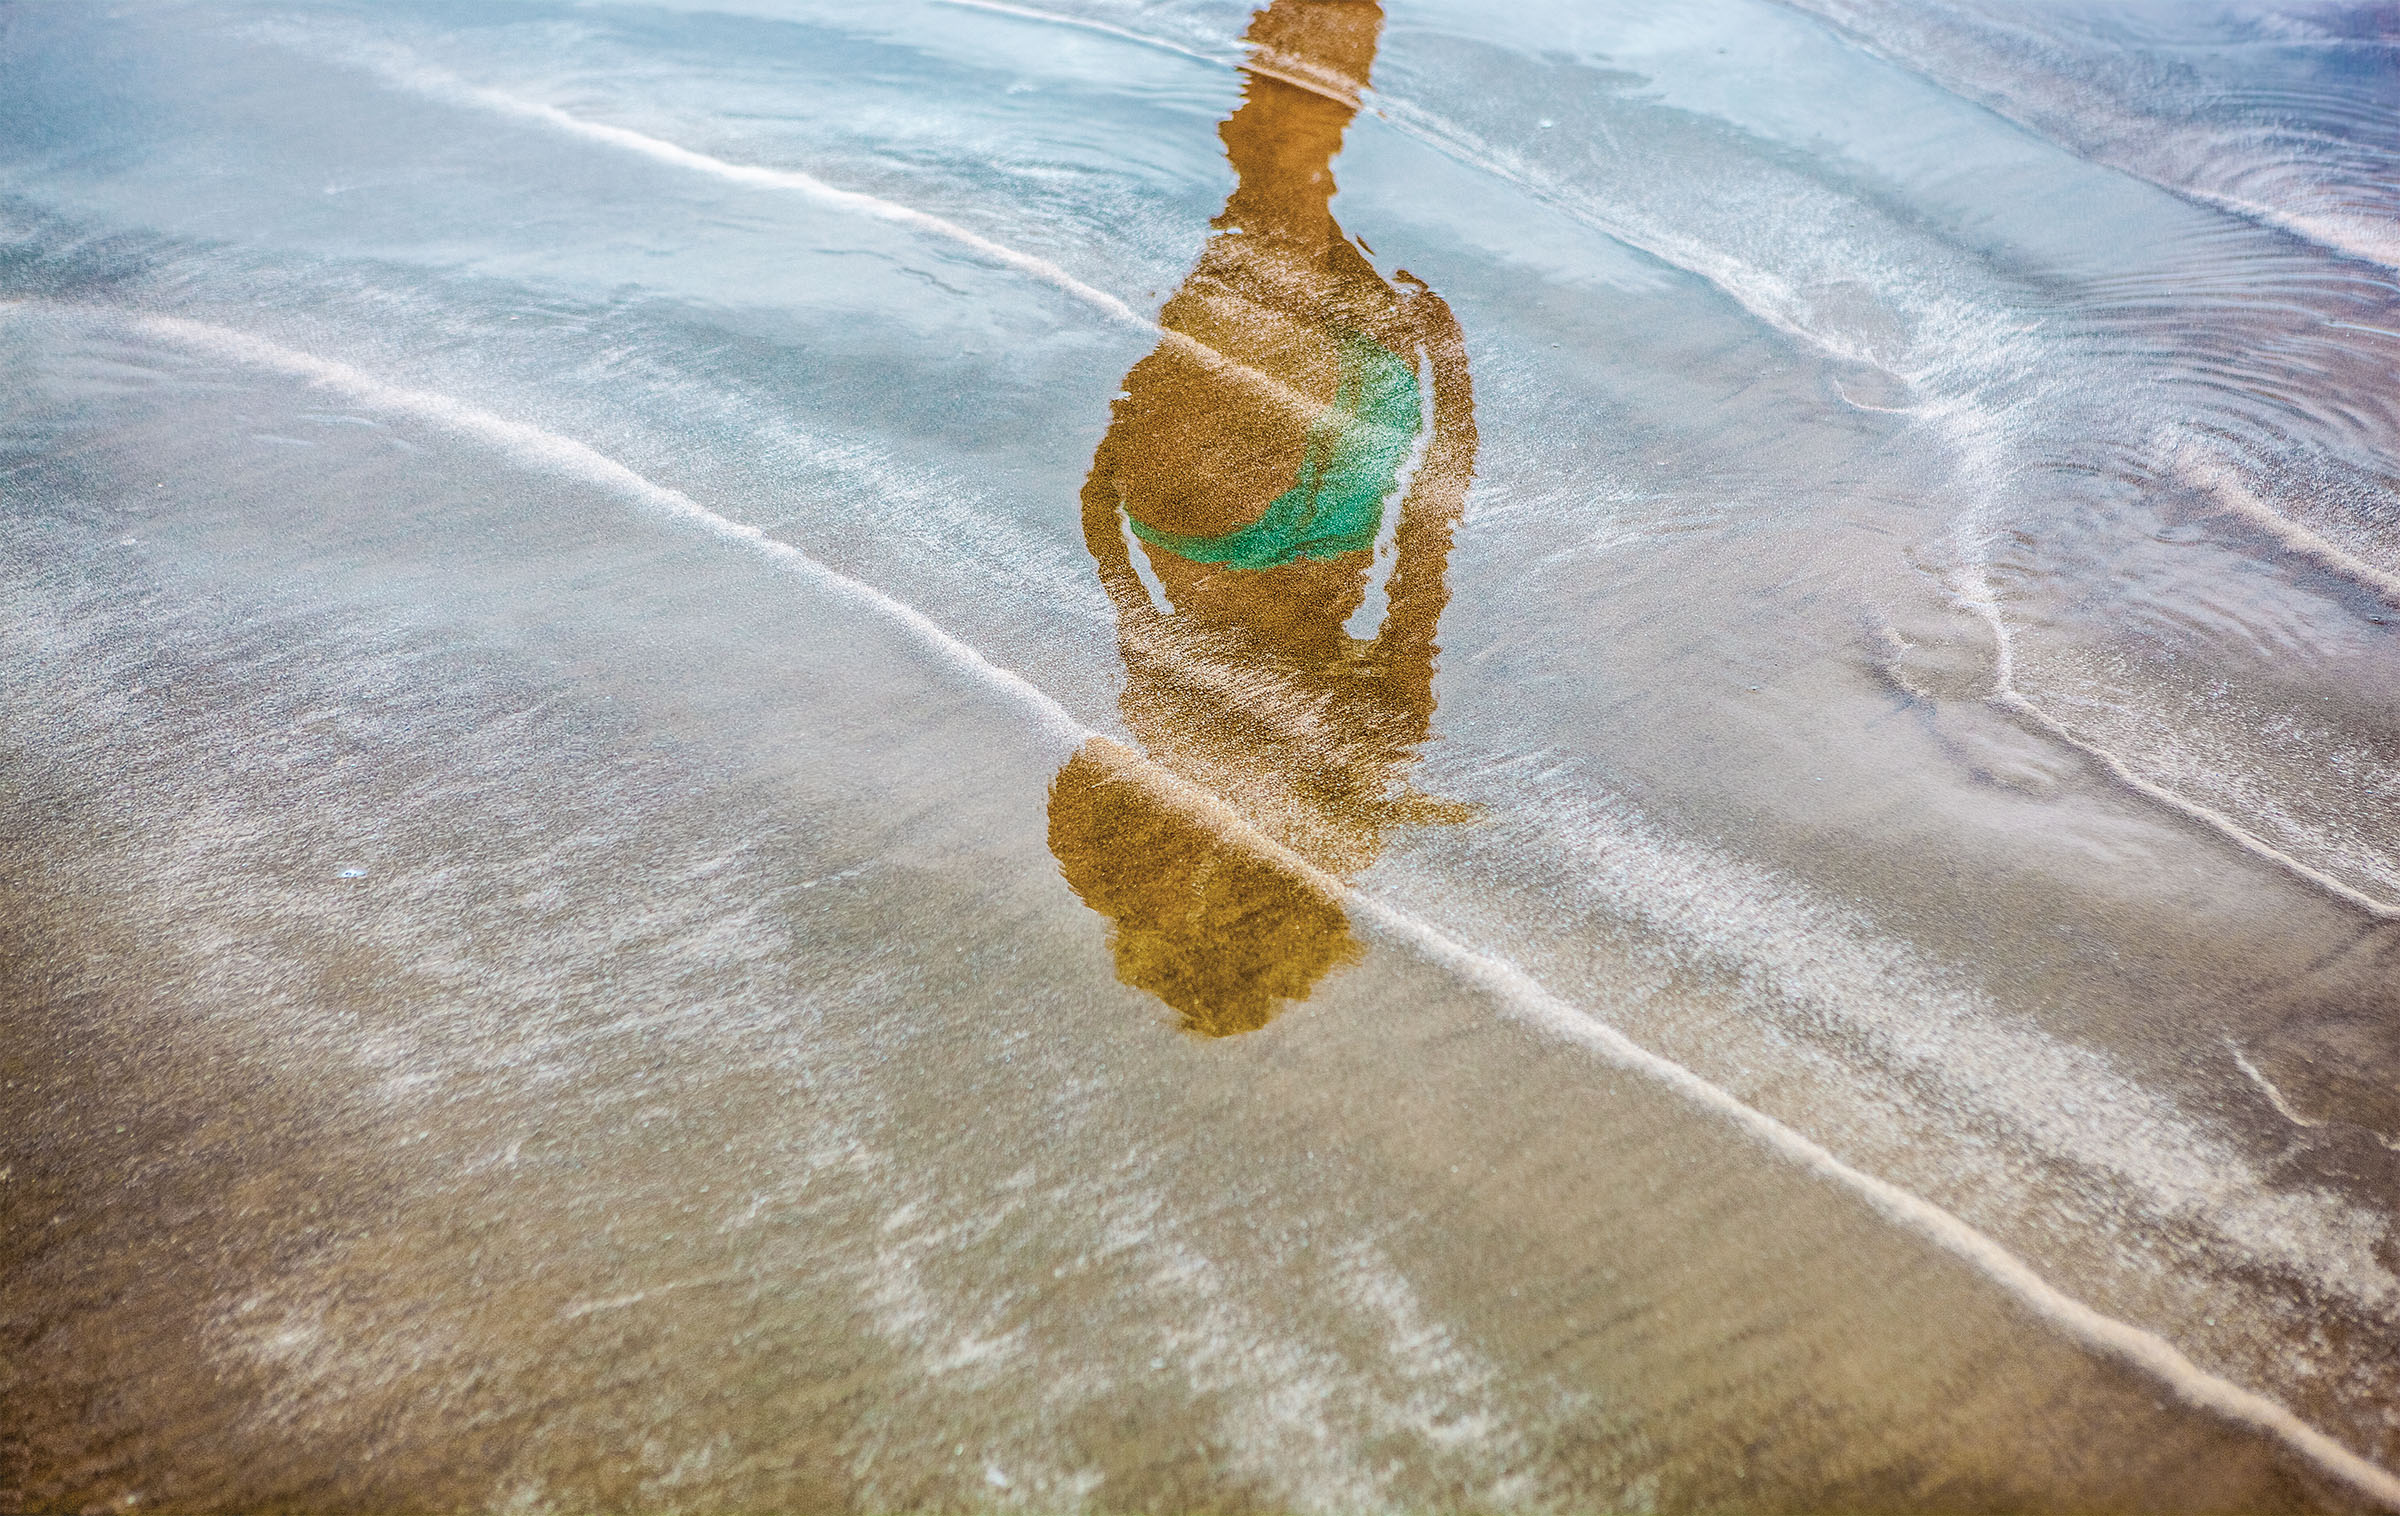 The reflection of a person walking the beach in a swimsuit